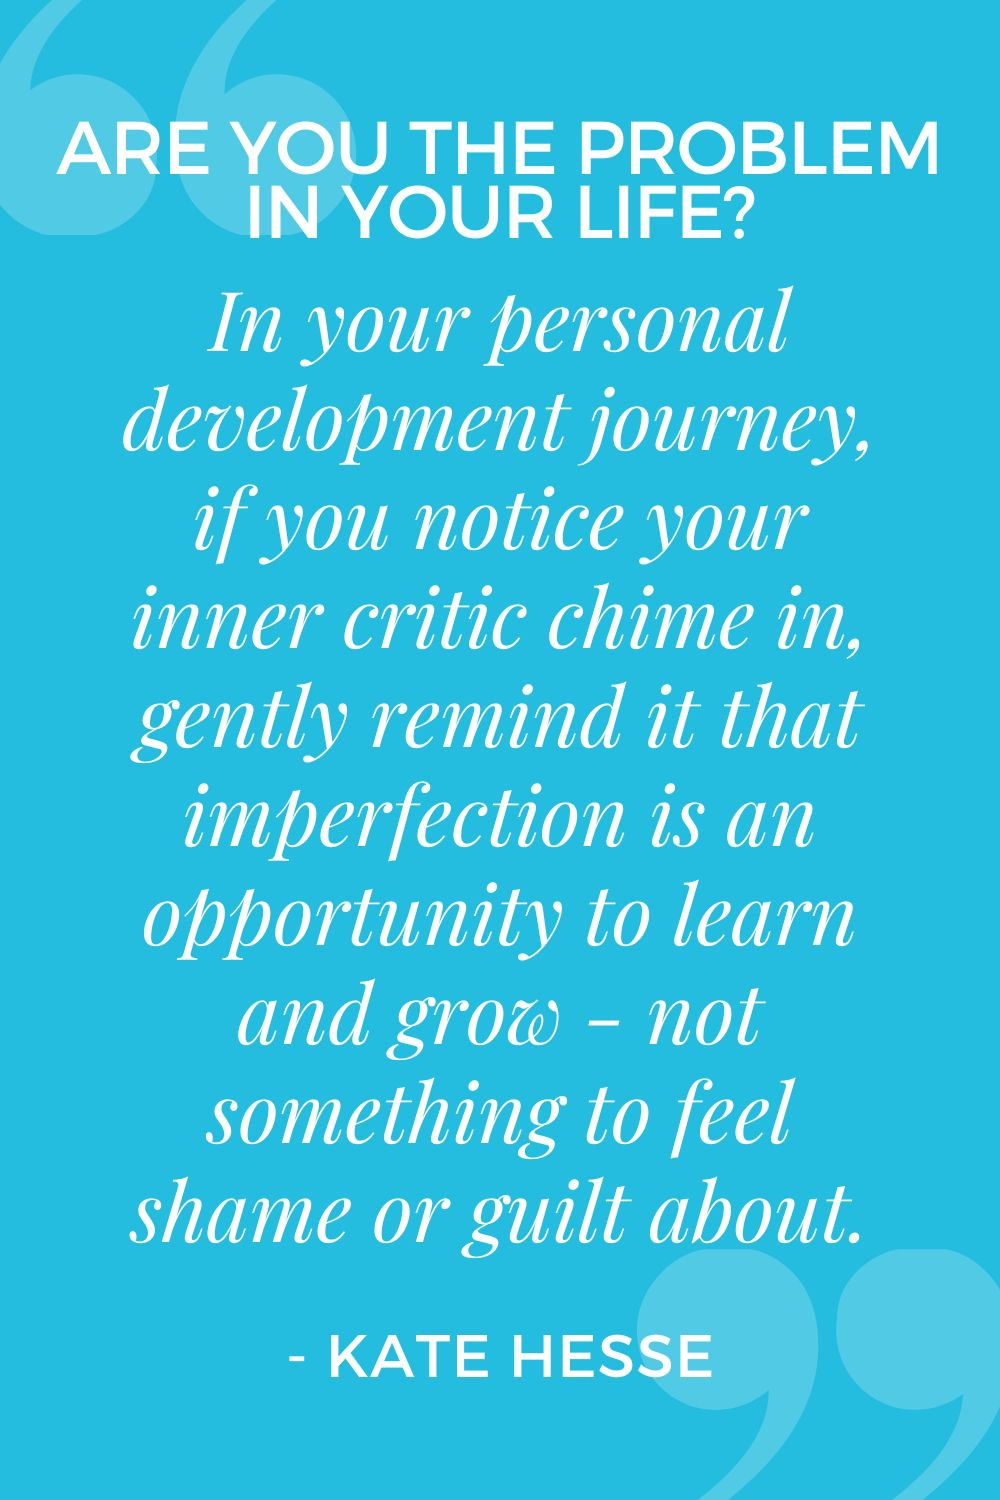 In your personal development journey, if you notice your inner critic chime in, gently remind it that imperfection is an opportunity to learn and grow - not something to feel shame or guilt about.